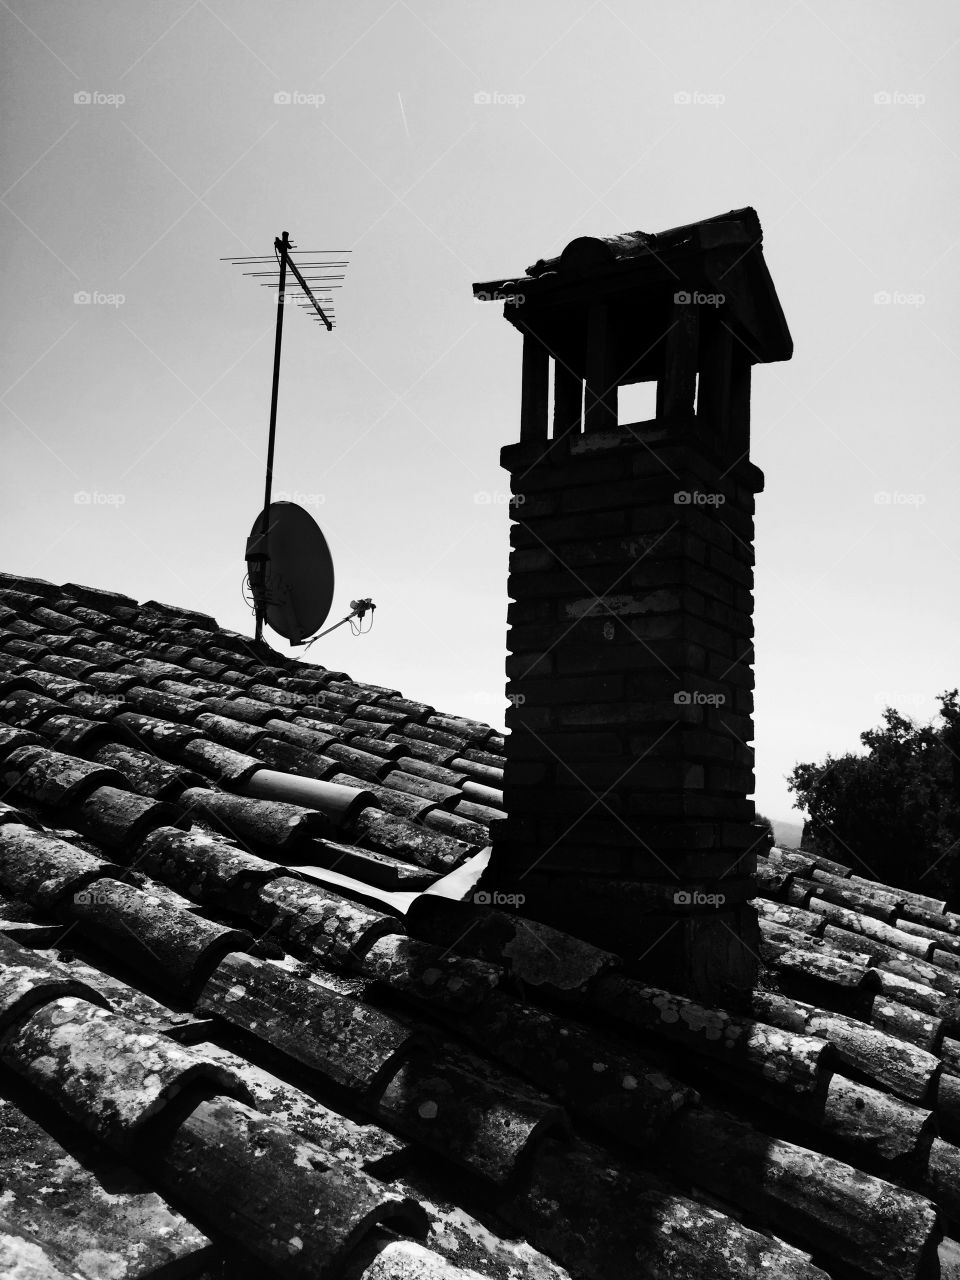 Shingles roof black and white 